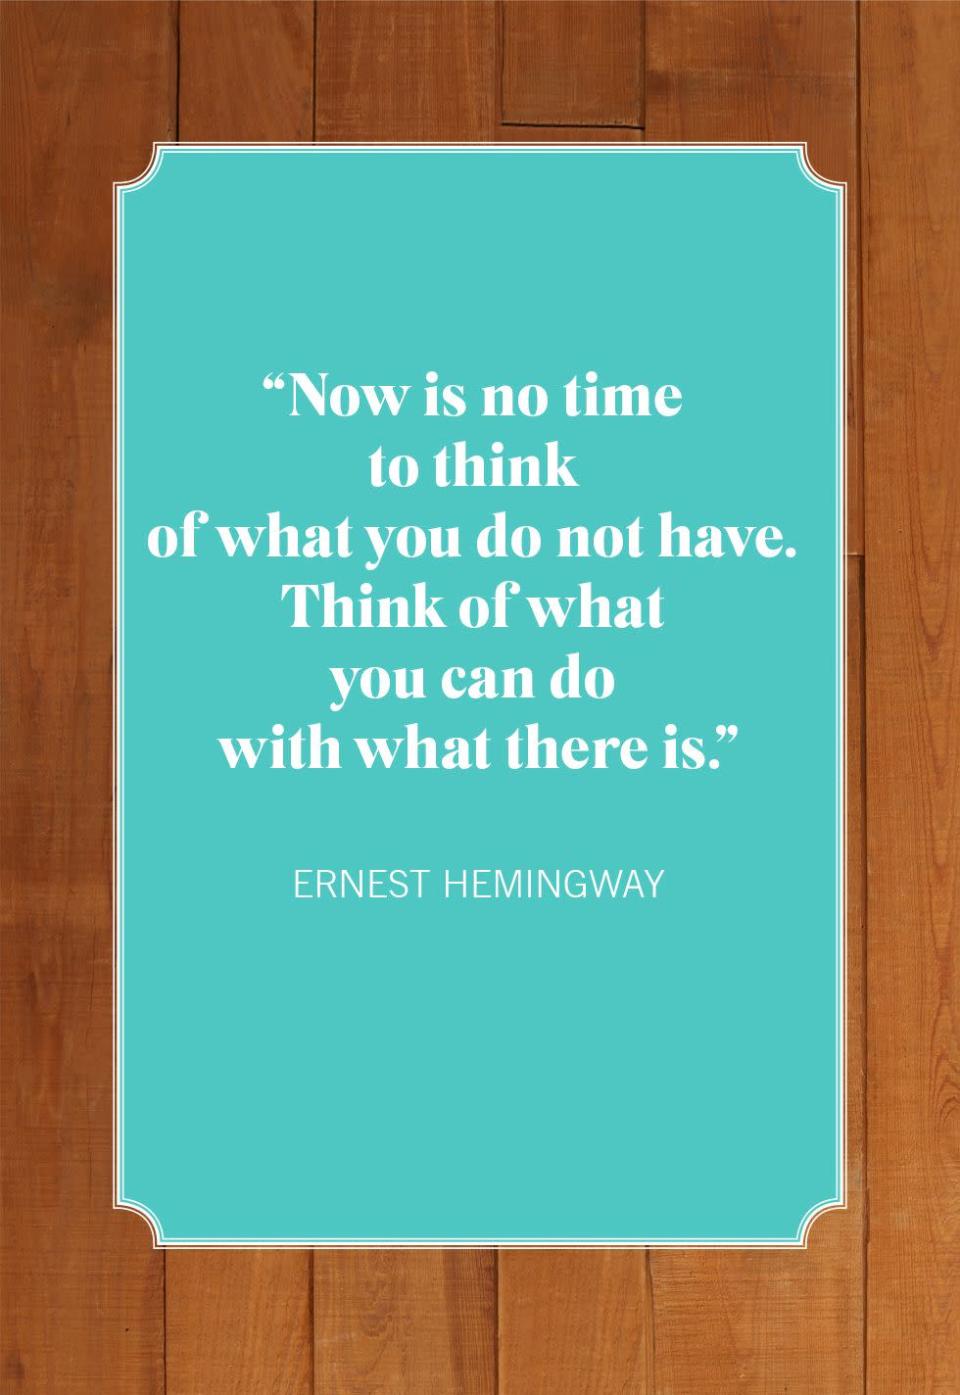 <p>"Now is no time to think of what you do not have. Think of what you can do with what there is."</p>